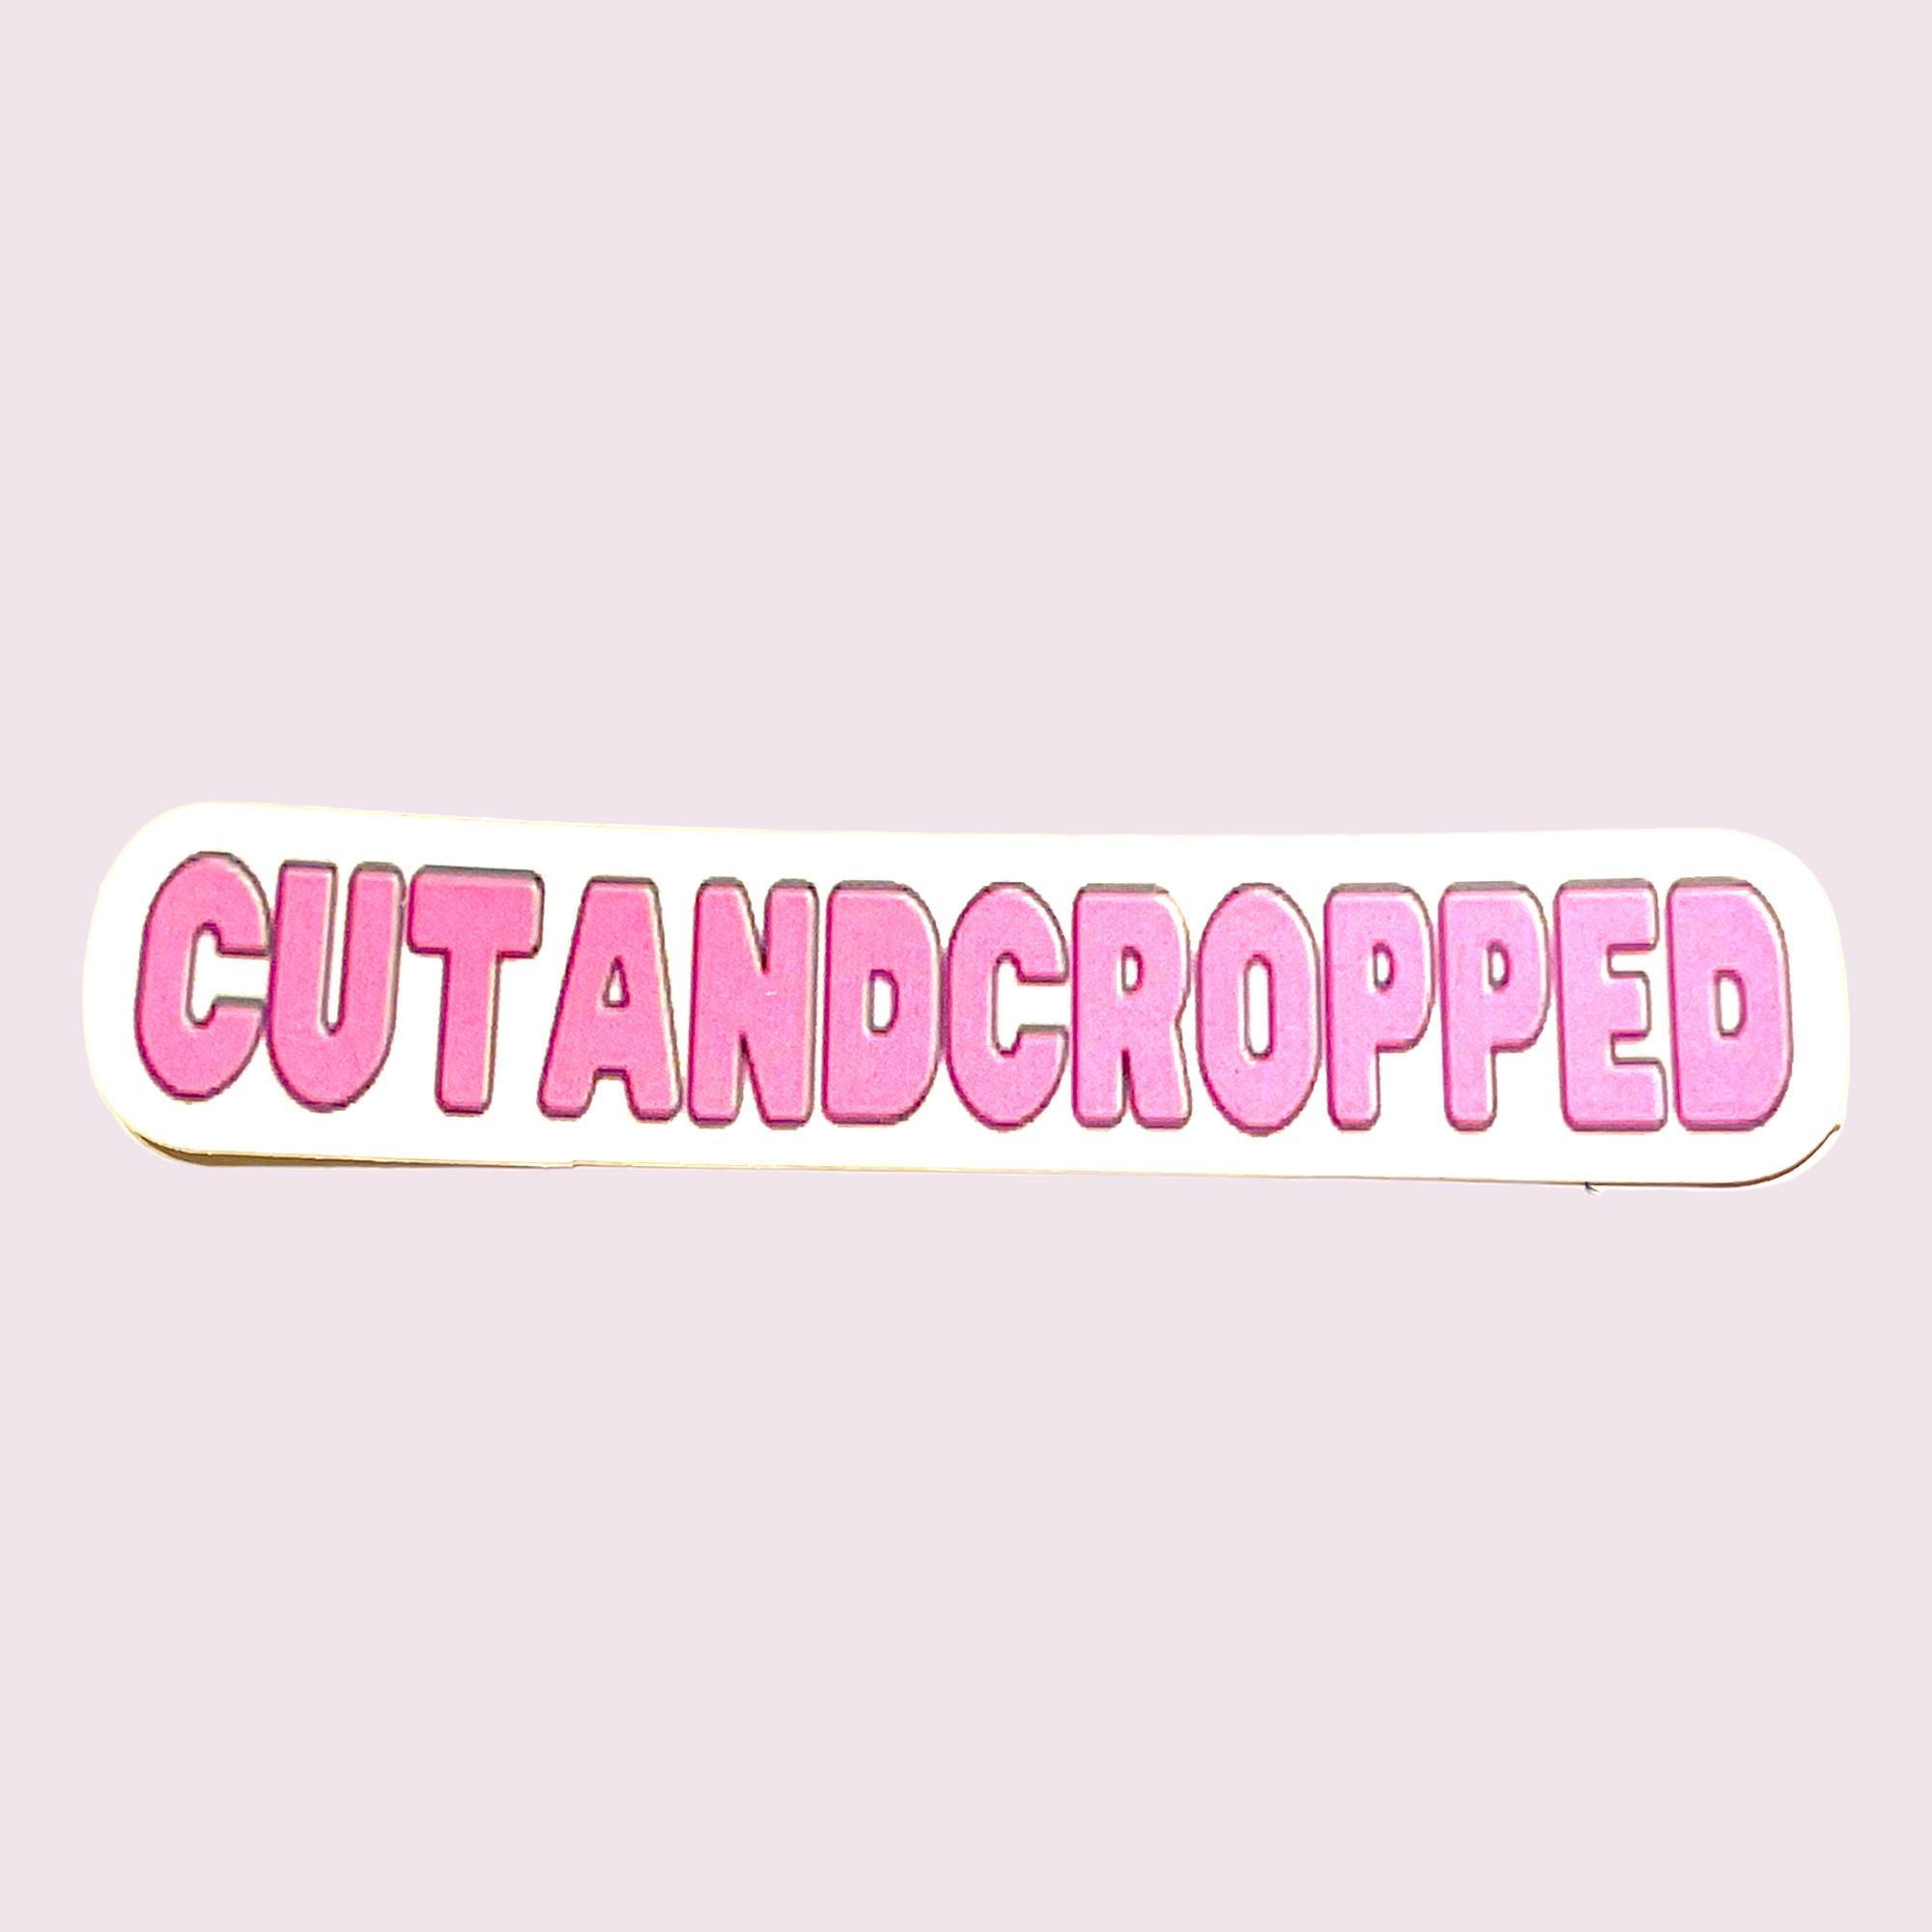 Cutandcropped bubble font Sticker